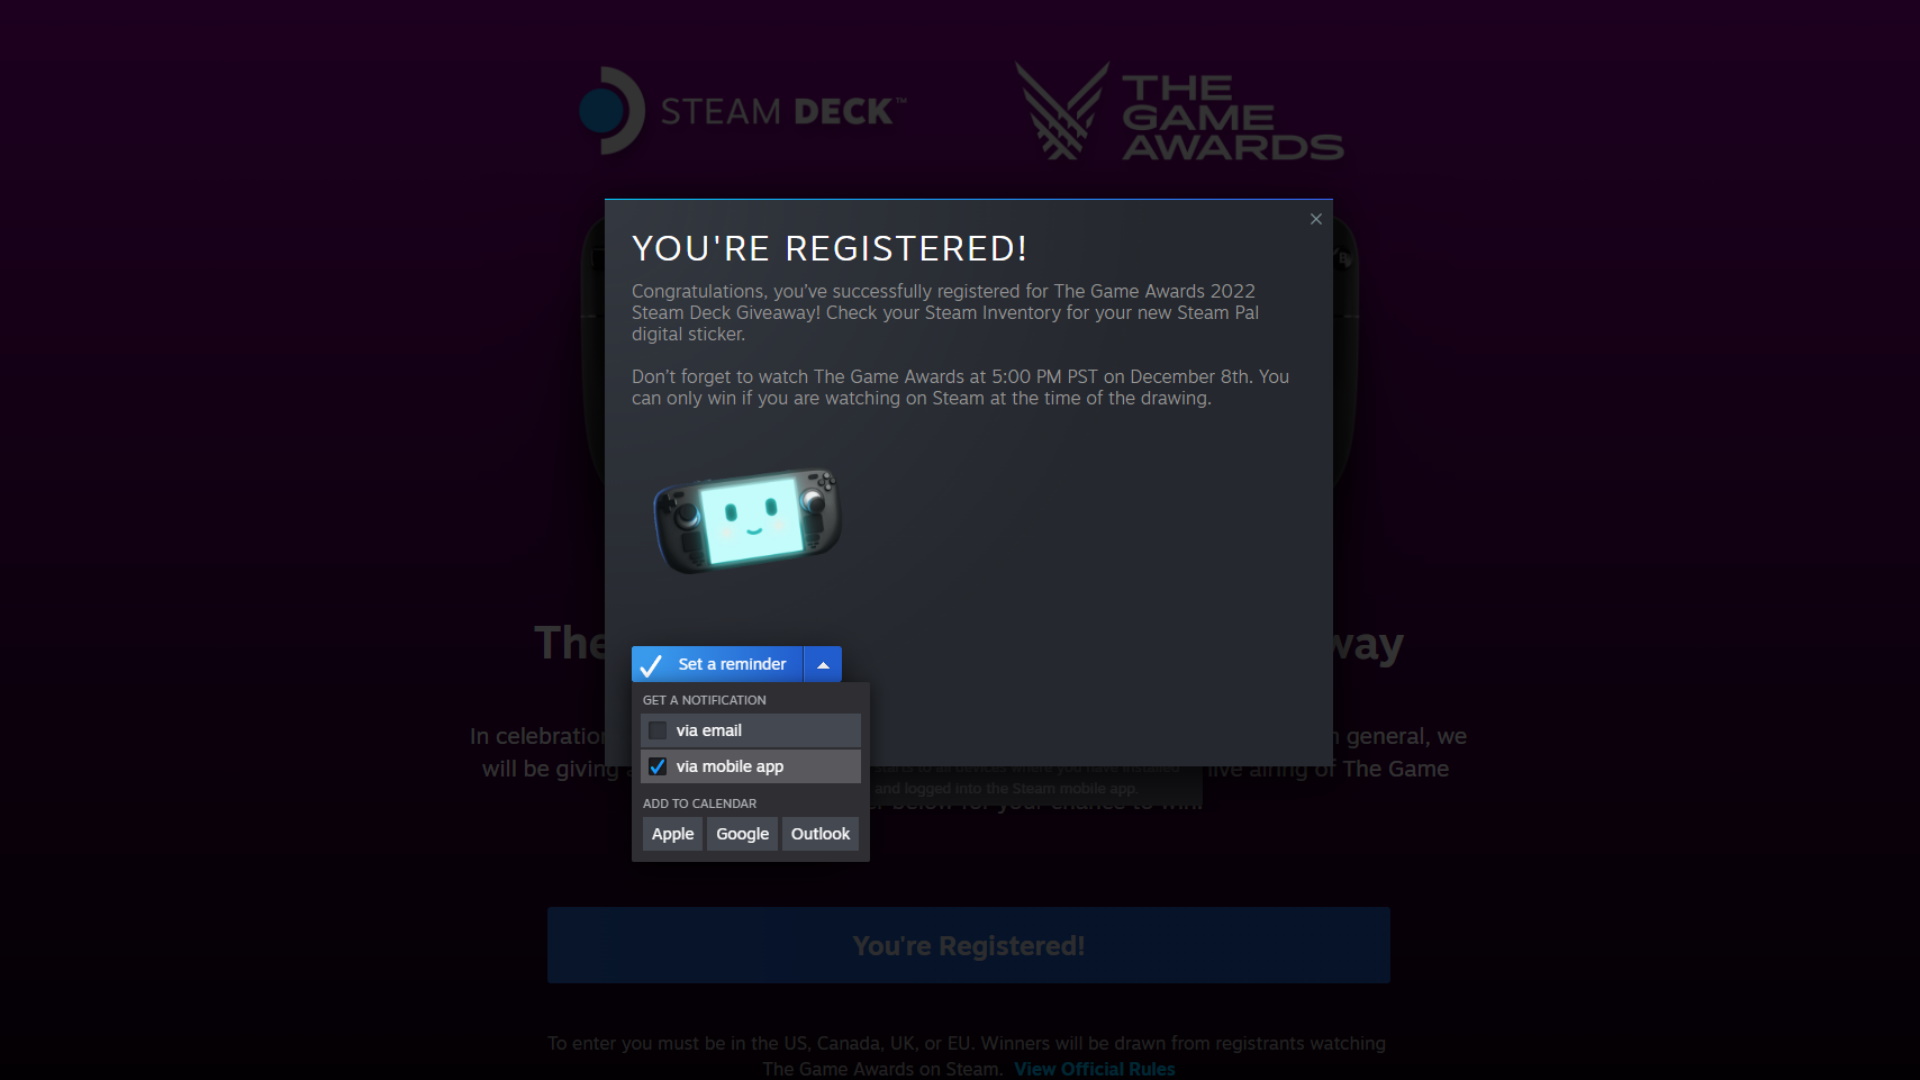 Valve is giving away a Steam Deck every minute of the Game Awards but sign-ups are causing trouble